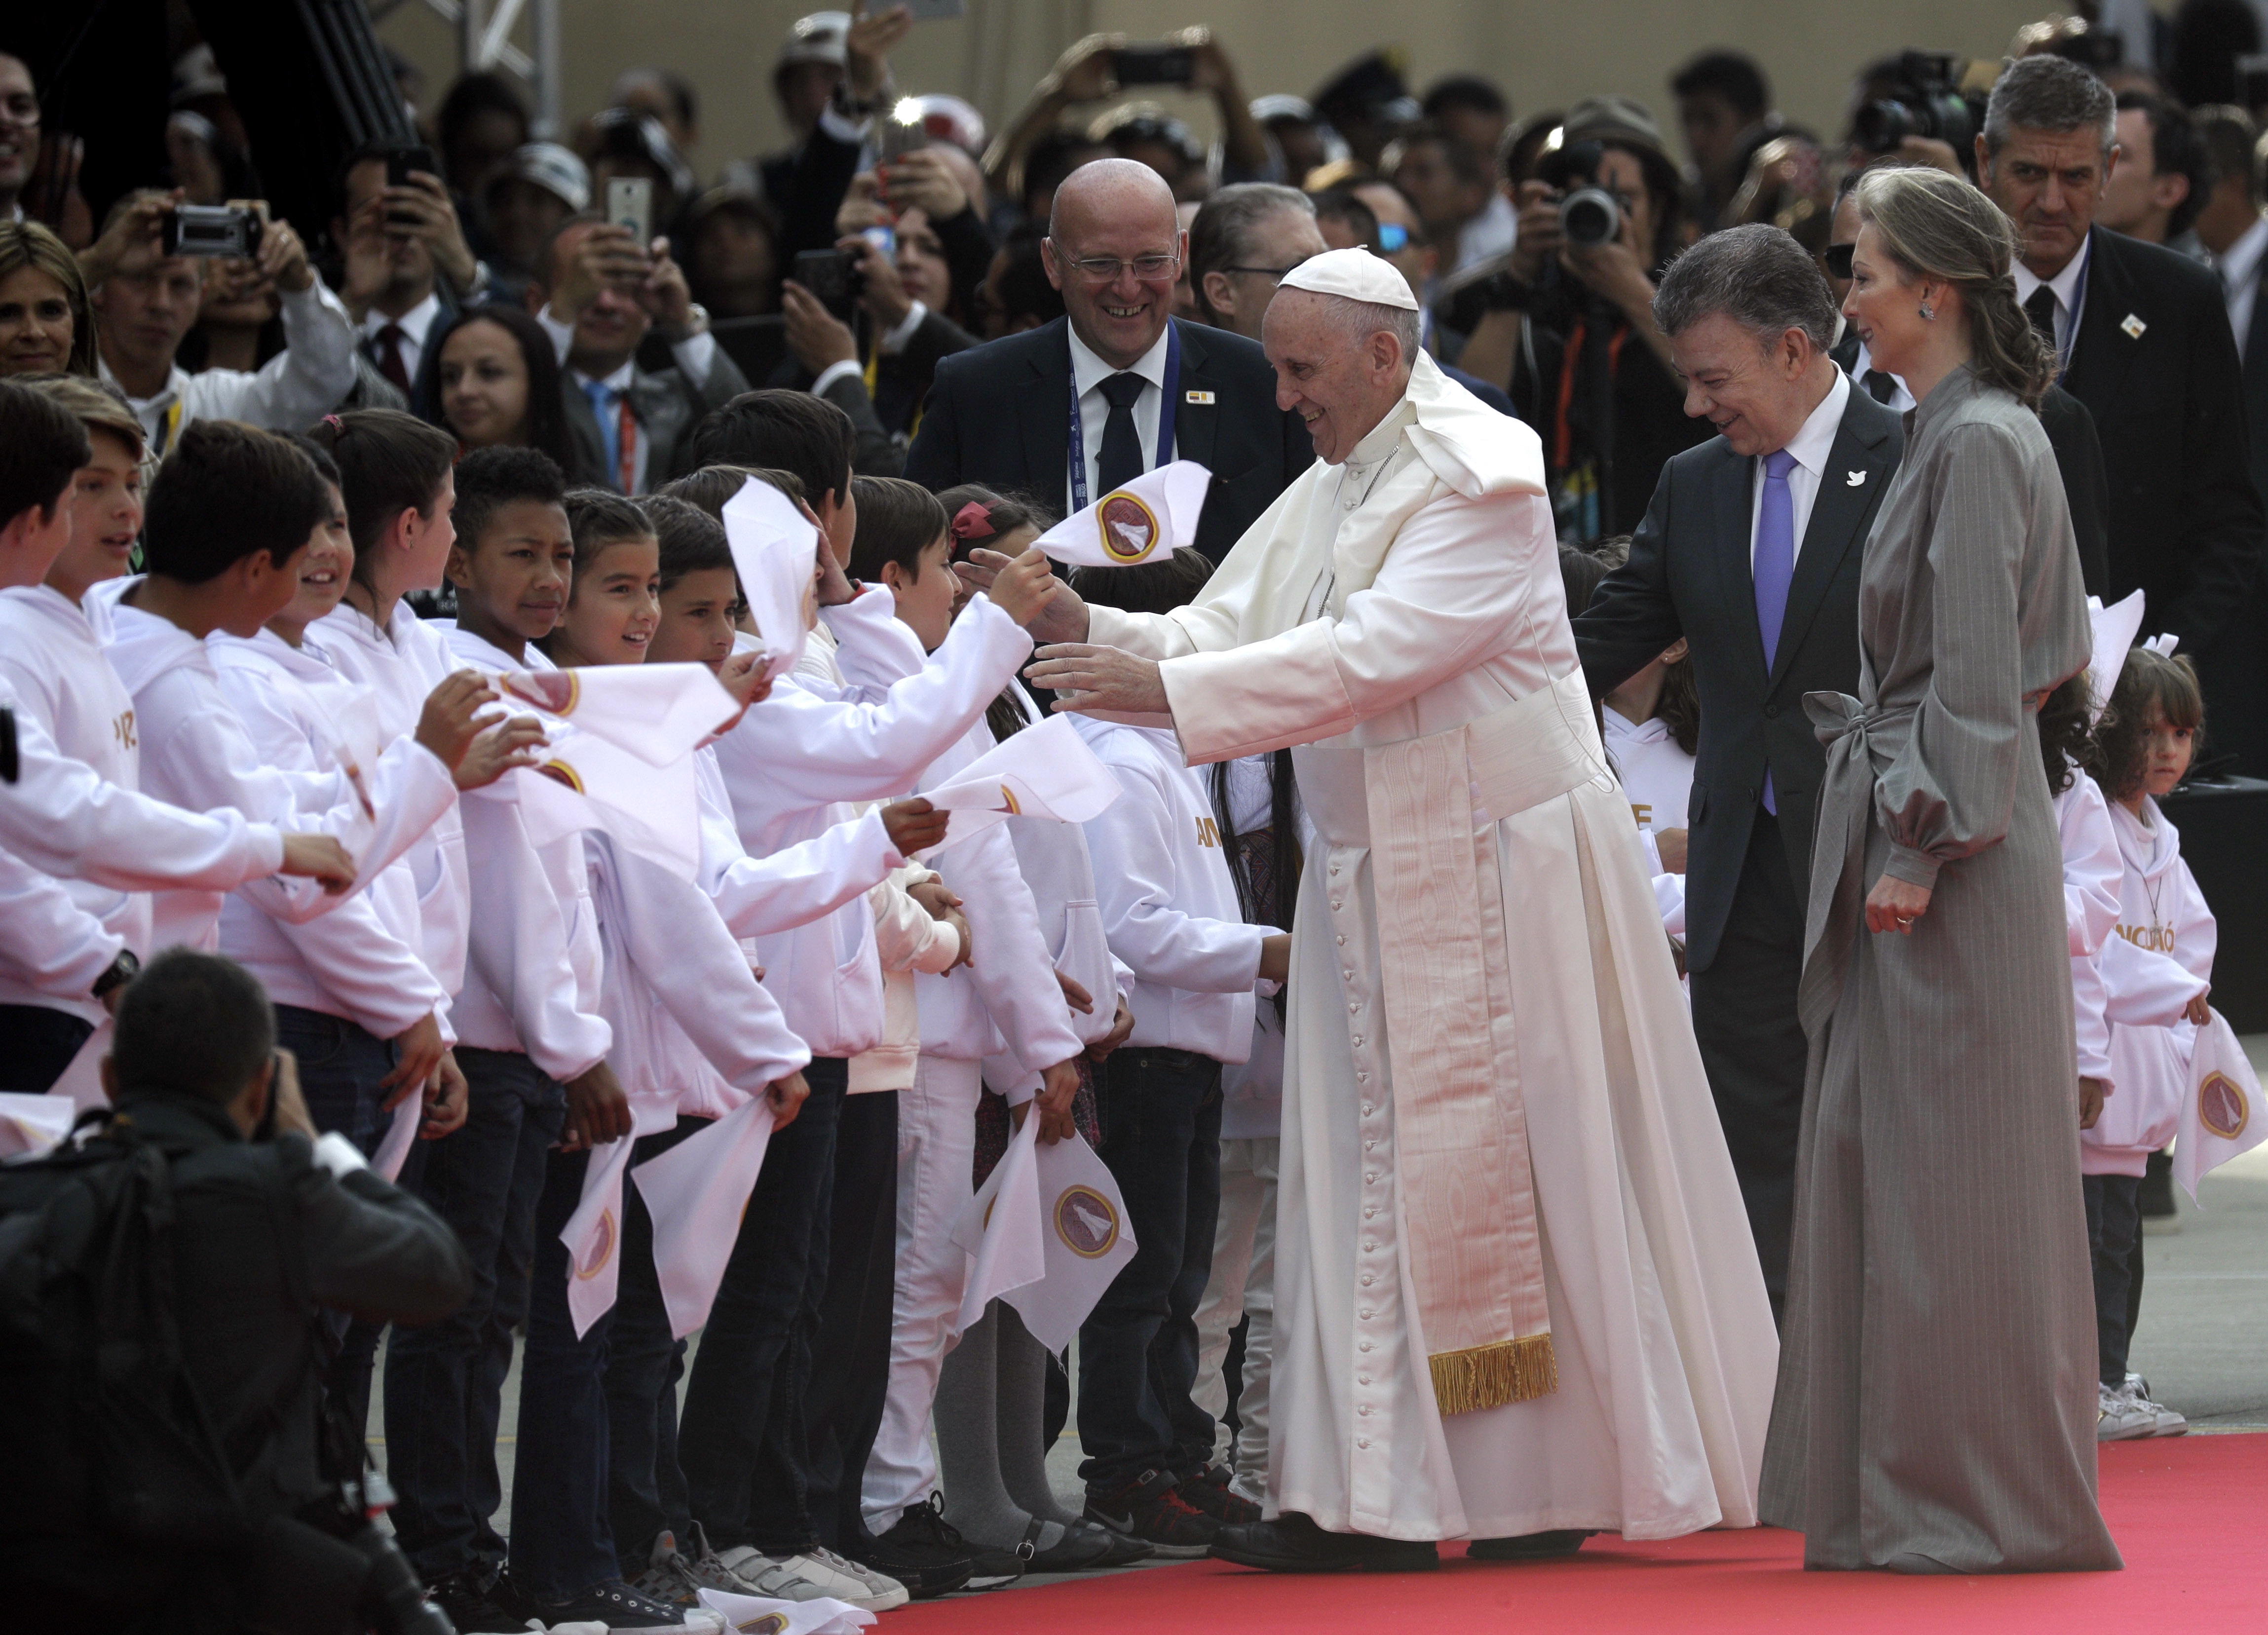 Colombia’s President Juan Manuel Santos, second from right,  and wife Maria Clemencia Rodriguez accompany Pope Francis as he is greeted by Colombian children after his arrivalat El Dorado airport in Bogota, Colombia, Wednesday, Sept. 6, 2017. Pope Francis arrived in Colombia for a five-day visit. (AP Photo/Andrew Medichini)